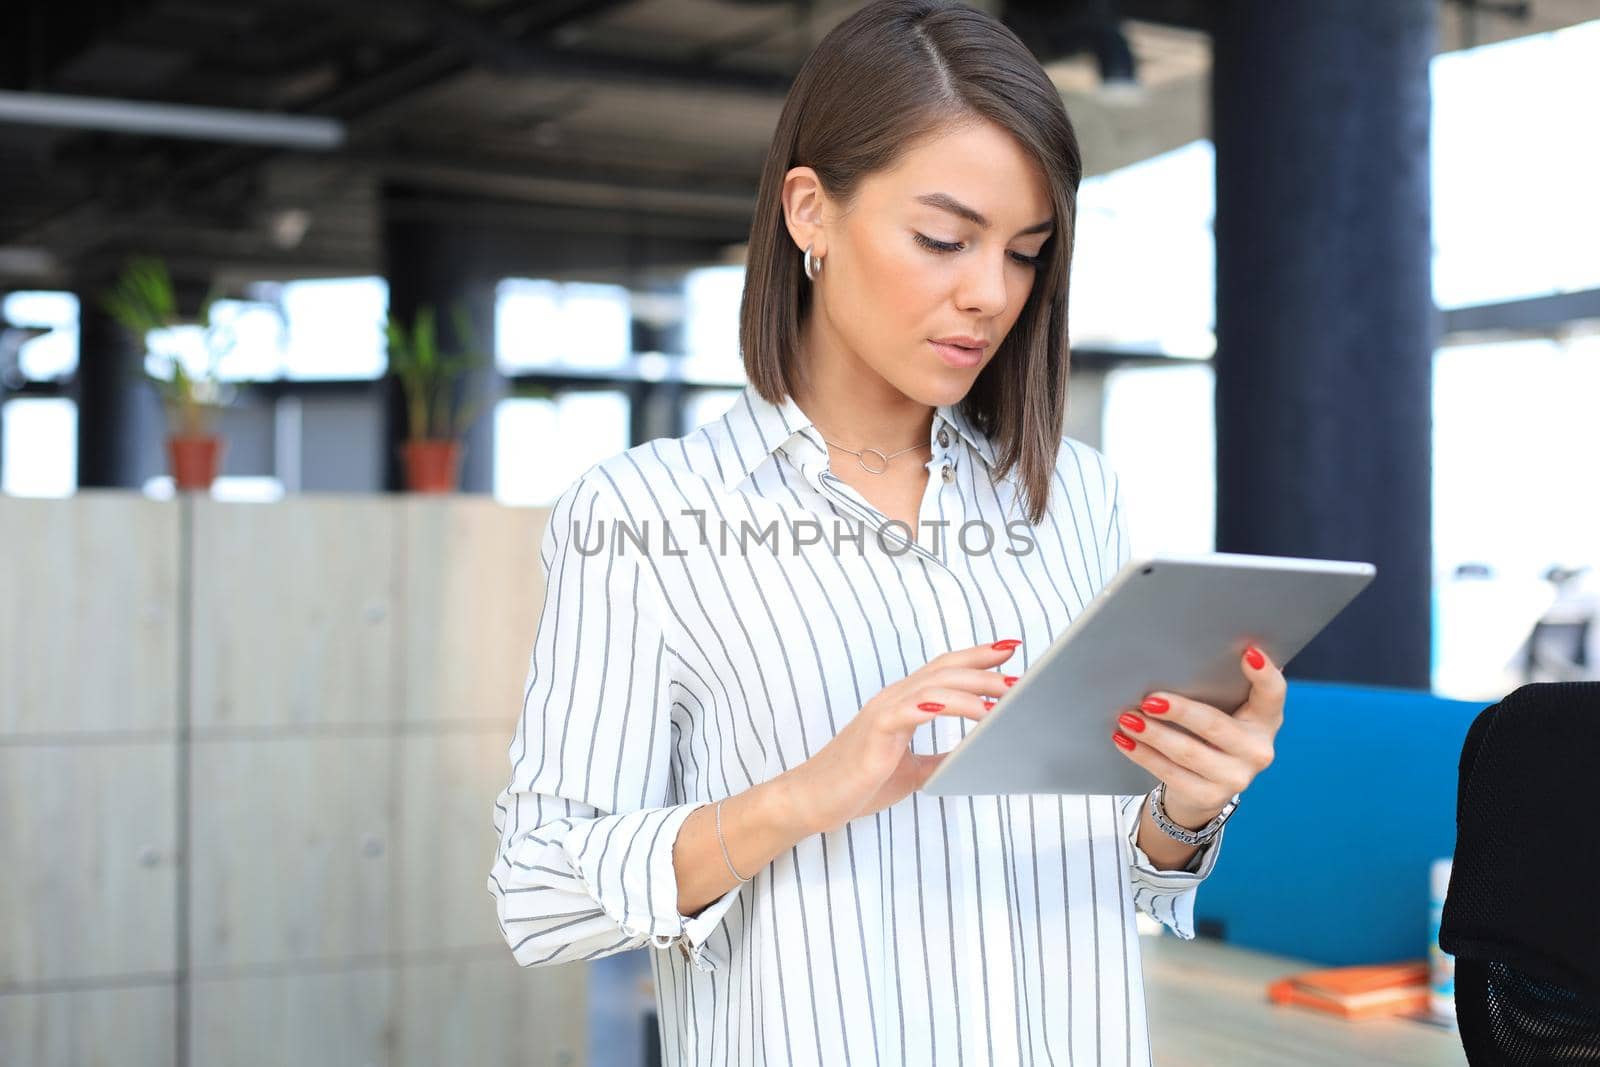 Portrait of young businesswoman looking at touch pad screen while standing in modern office space interior. by tsyhun